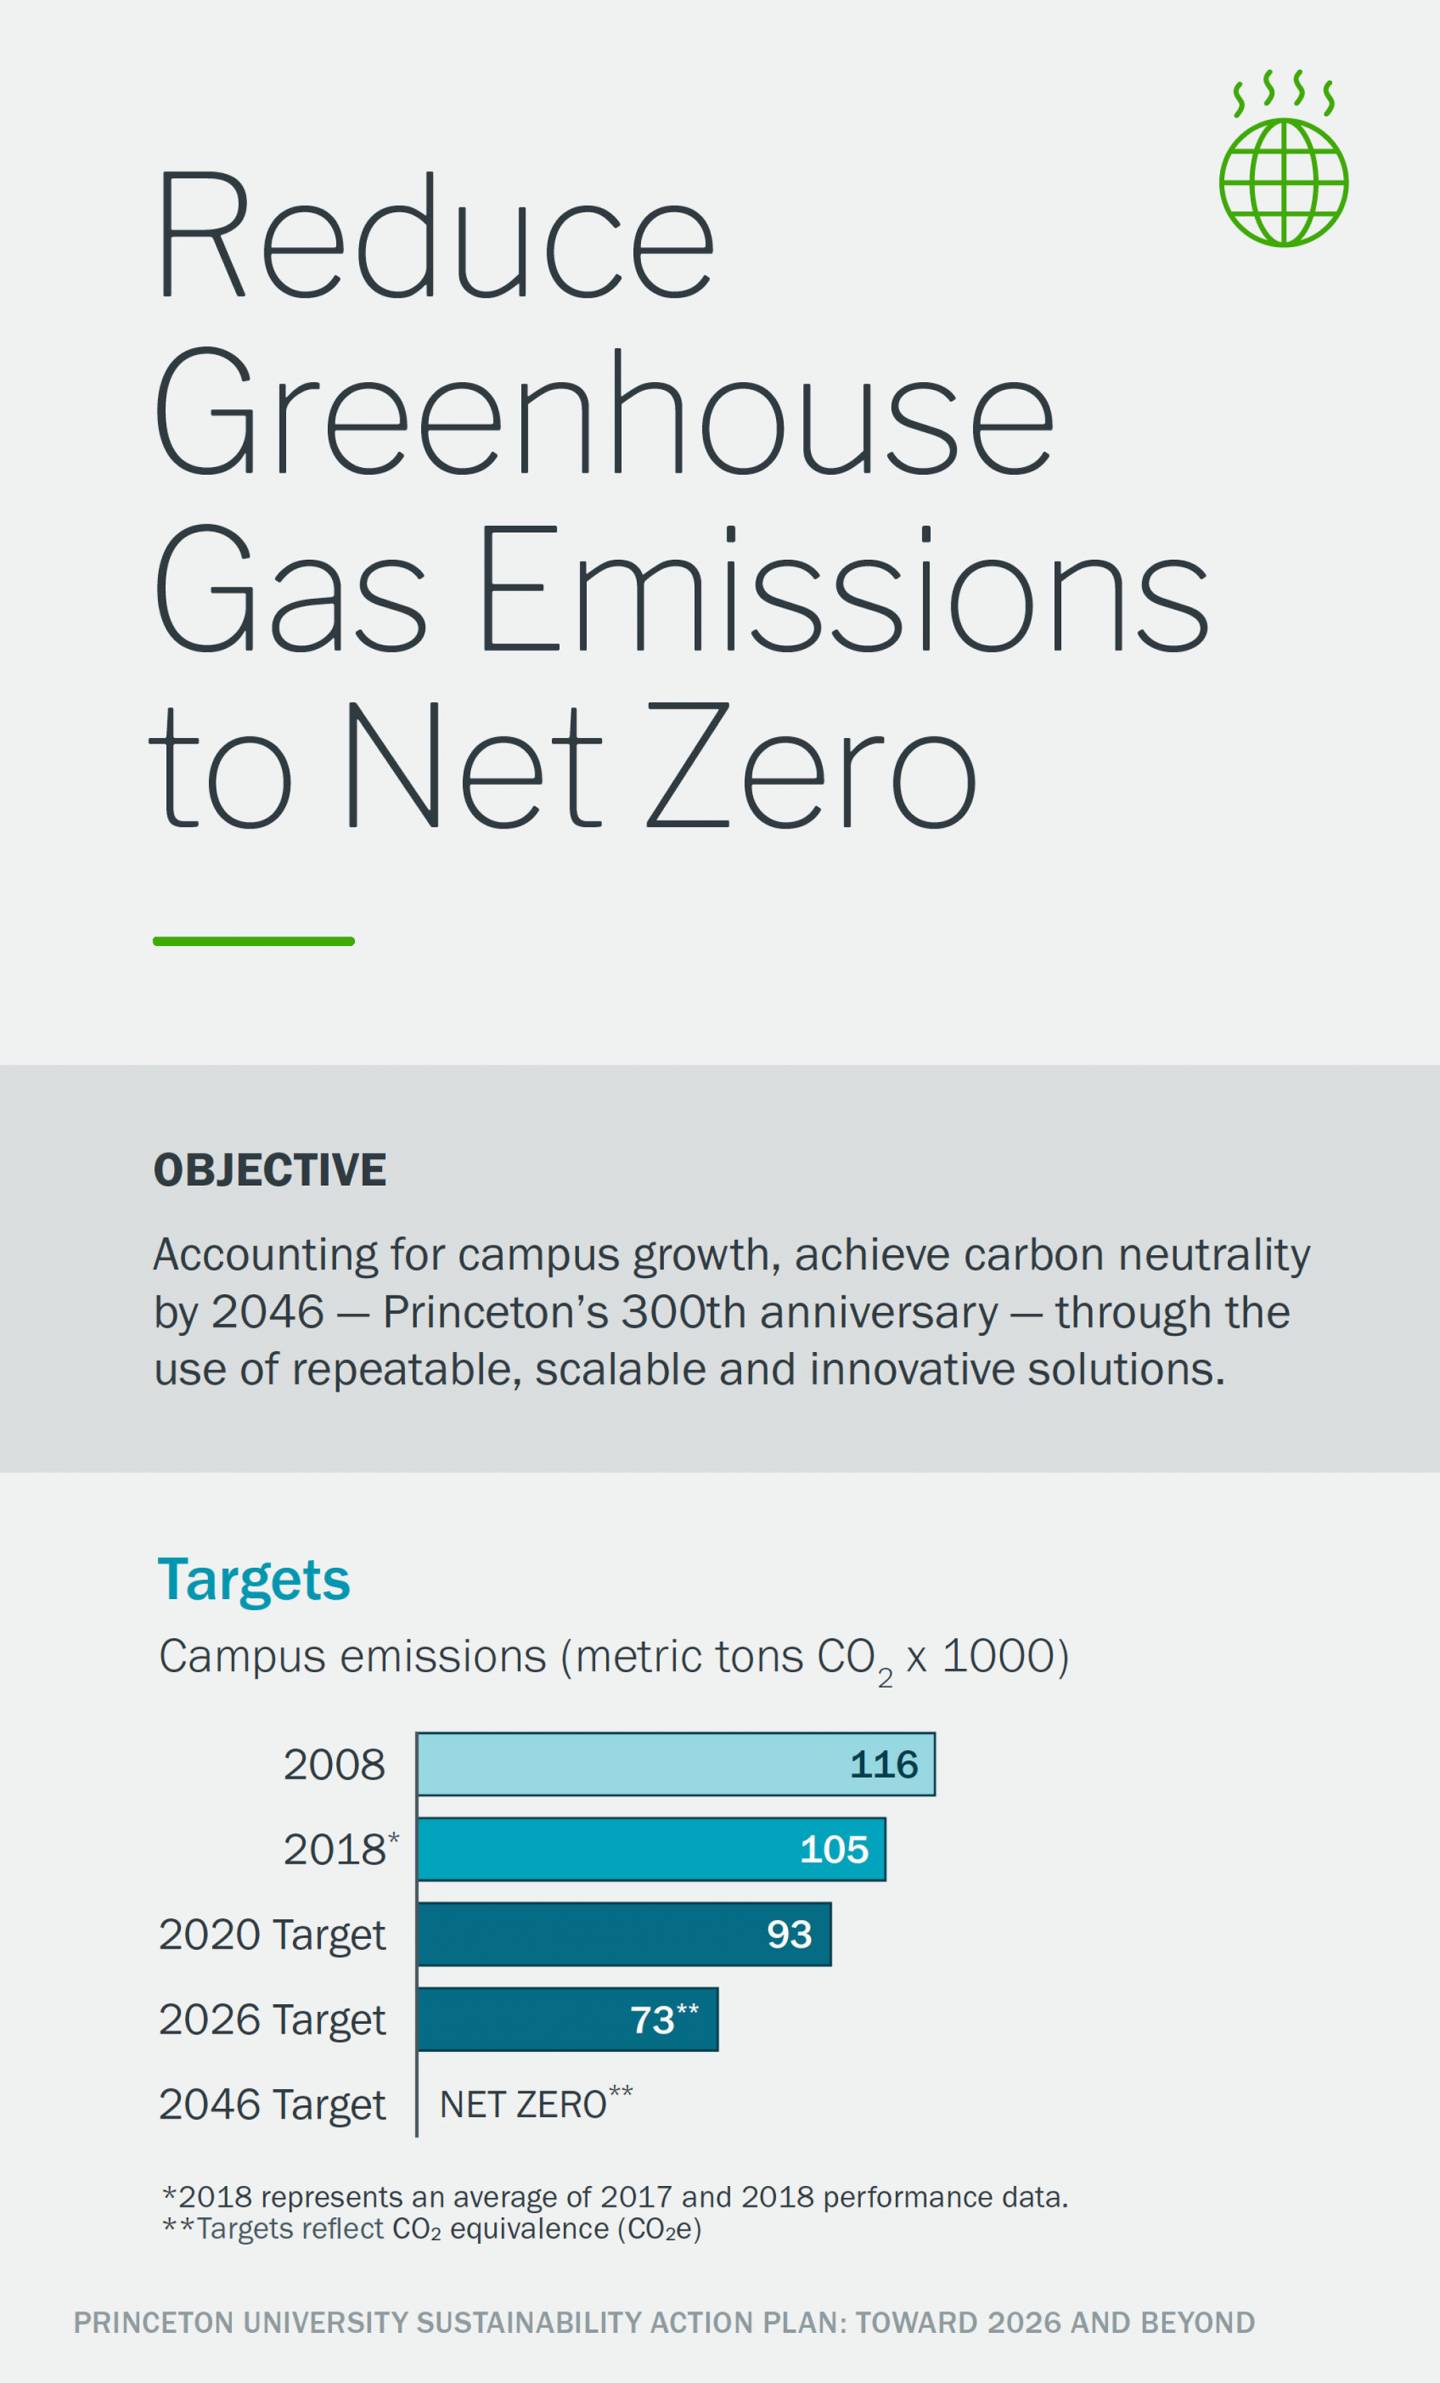 Graphic showing reduced Greenhouse Emissions: A bar graph showing that in 2008 campus emissions 116 metric tons of CO2 x 1000. Below, the graph shows the 2020 target of 93 metric tons of CO2 x 1000, the 2026 target of 73 metric tons of CO2 x 1000 and the 2046 target of Net Zero metric tons of CO2 x 1000